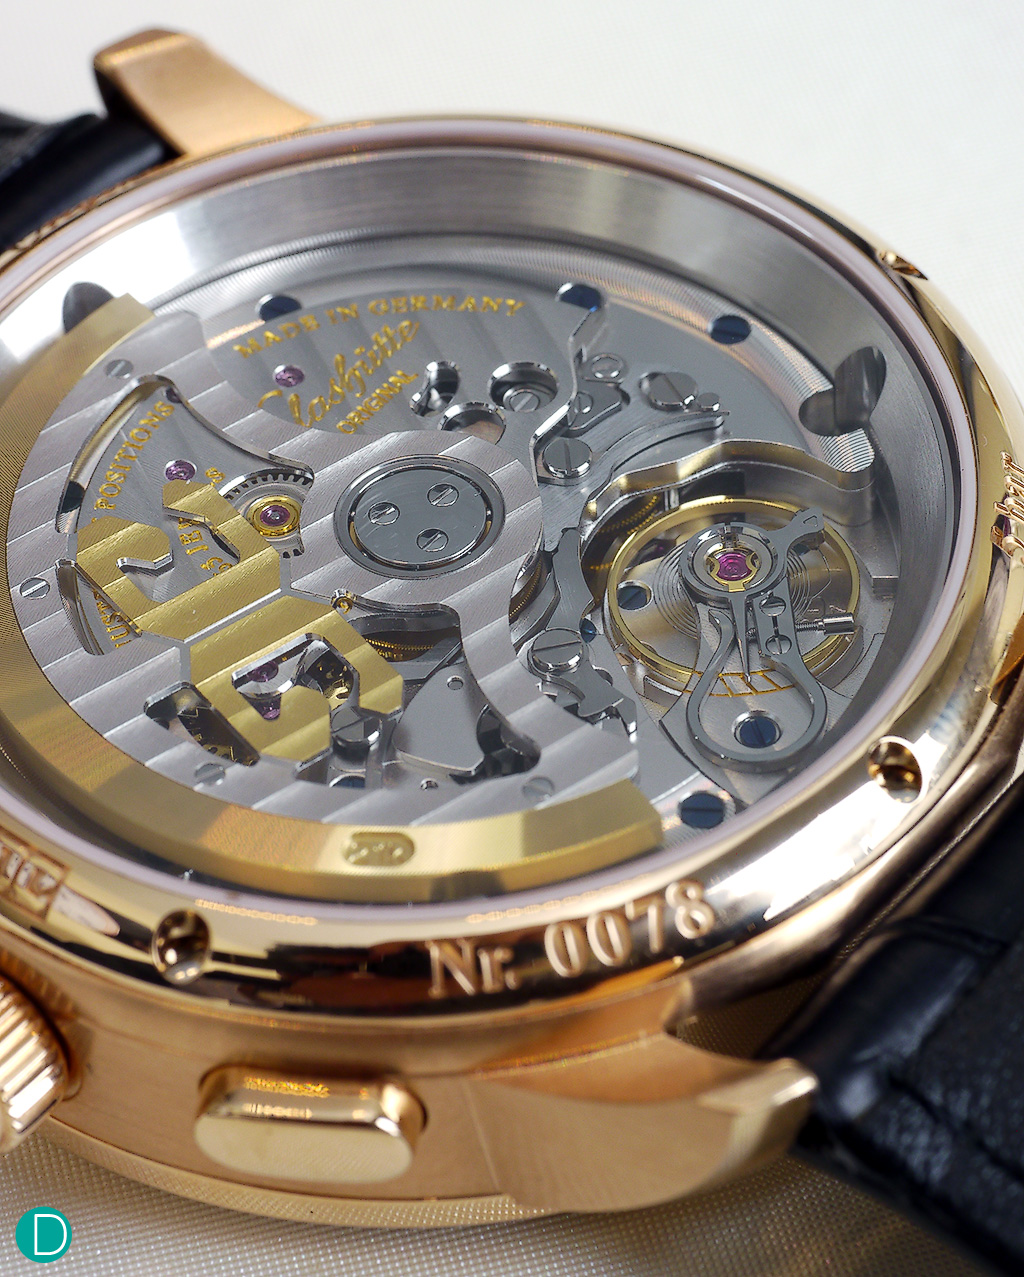 GO Caliber 37-01 column wheel flyback chronograph with big date. Automatic movement, power reserve of 70 hours, 4 Hz.